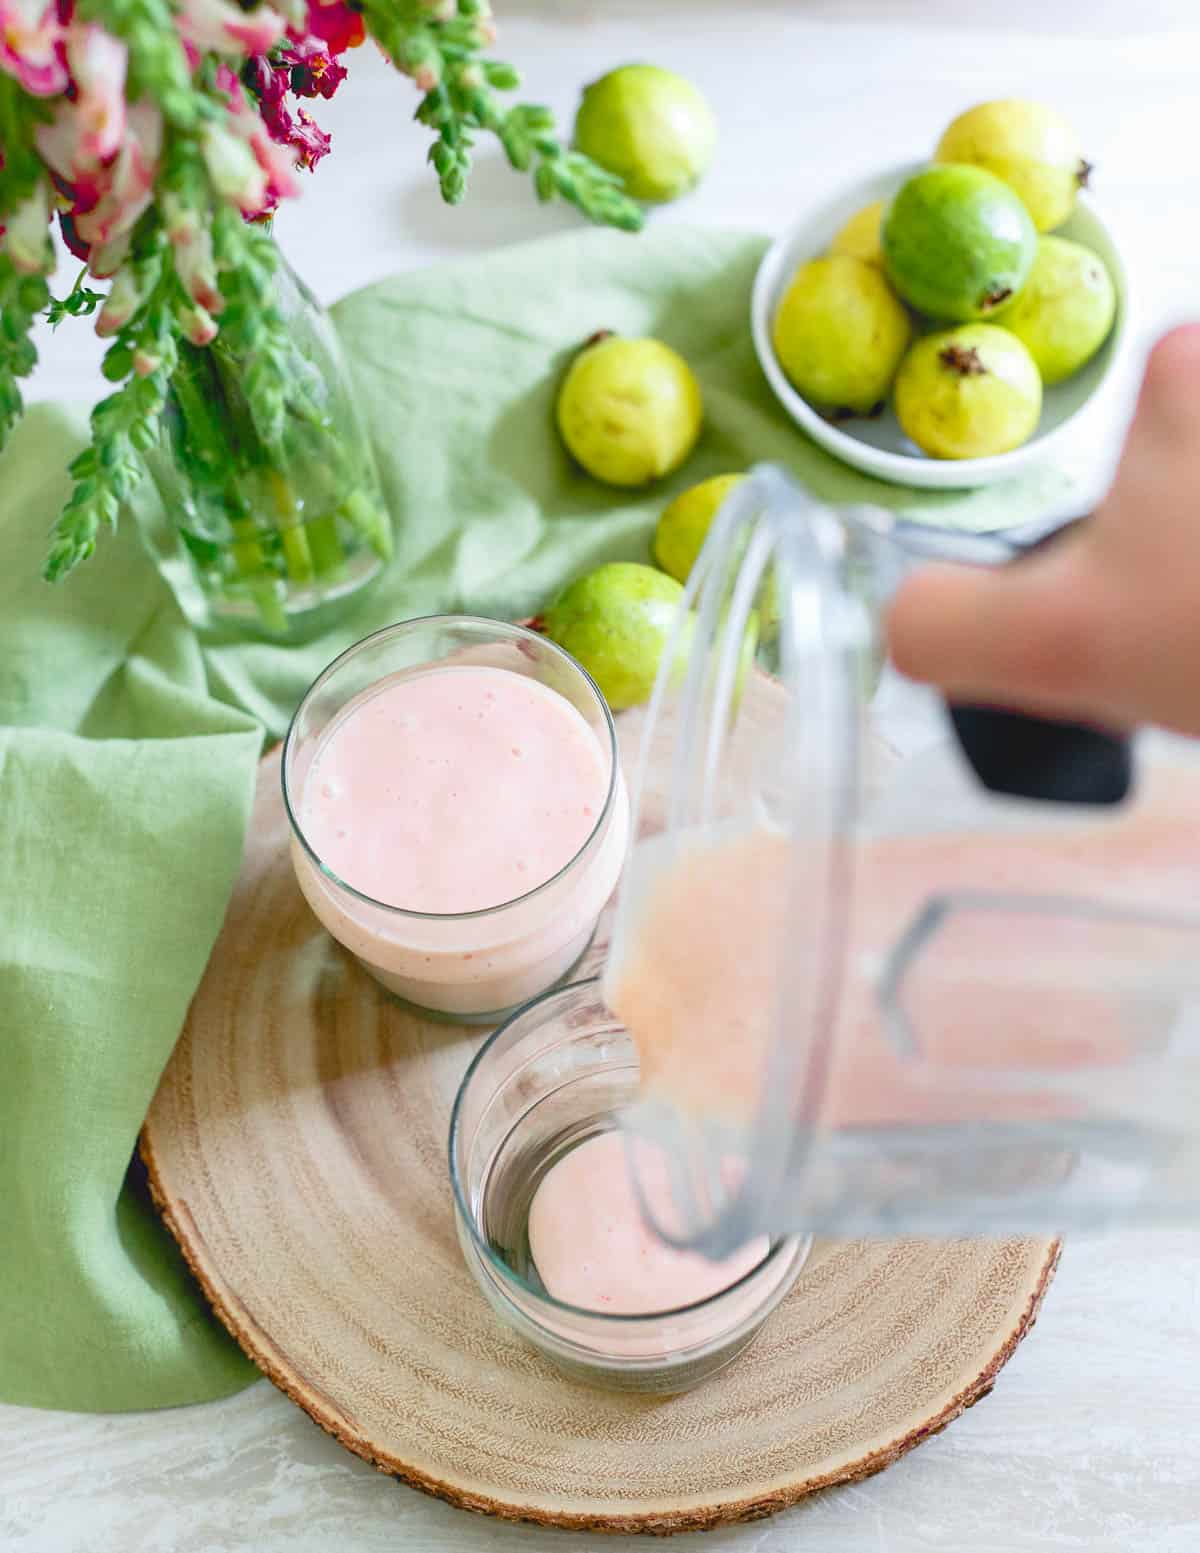 This simple smoothie of guava, pineapple and light coconut milk is a delicious and healthy way to cool off in the summer.